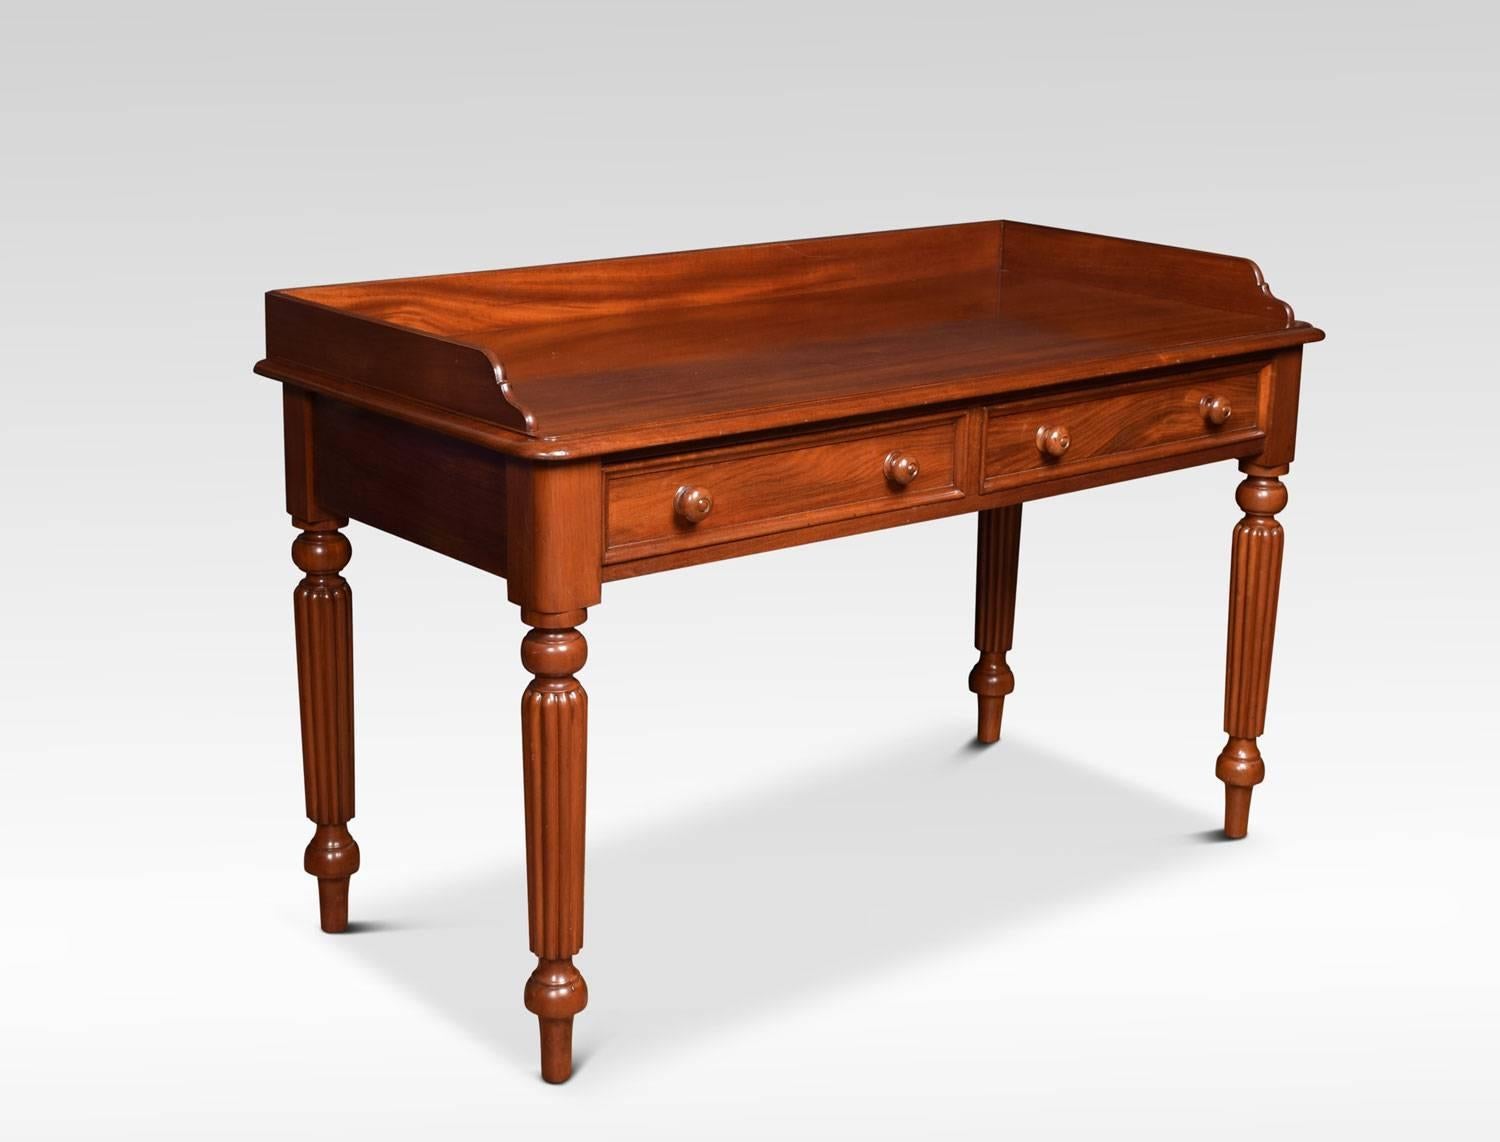 19th century writing table, having large mahogany top with raised three quarter gallery above two frieze drawers with turned knobs and ash lined draws. All raised up on turned tapered reeded legs,

Dimensions:
Height 31 inches
Length 50